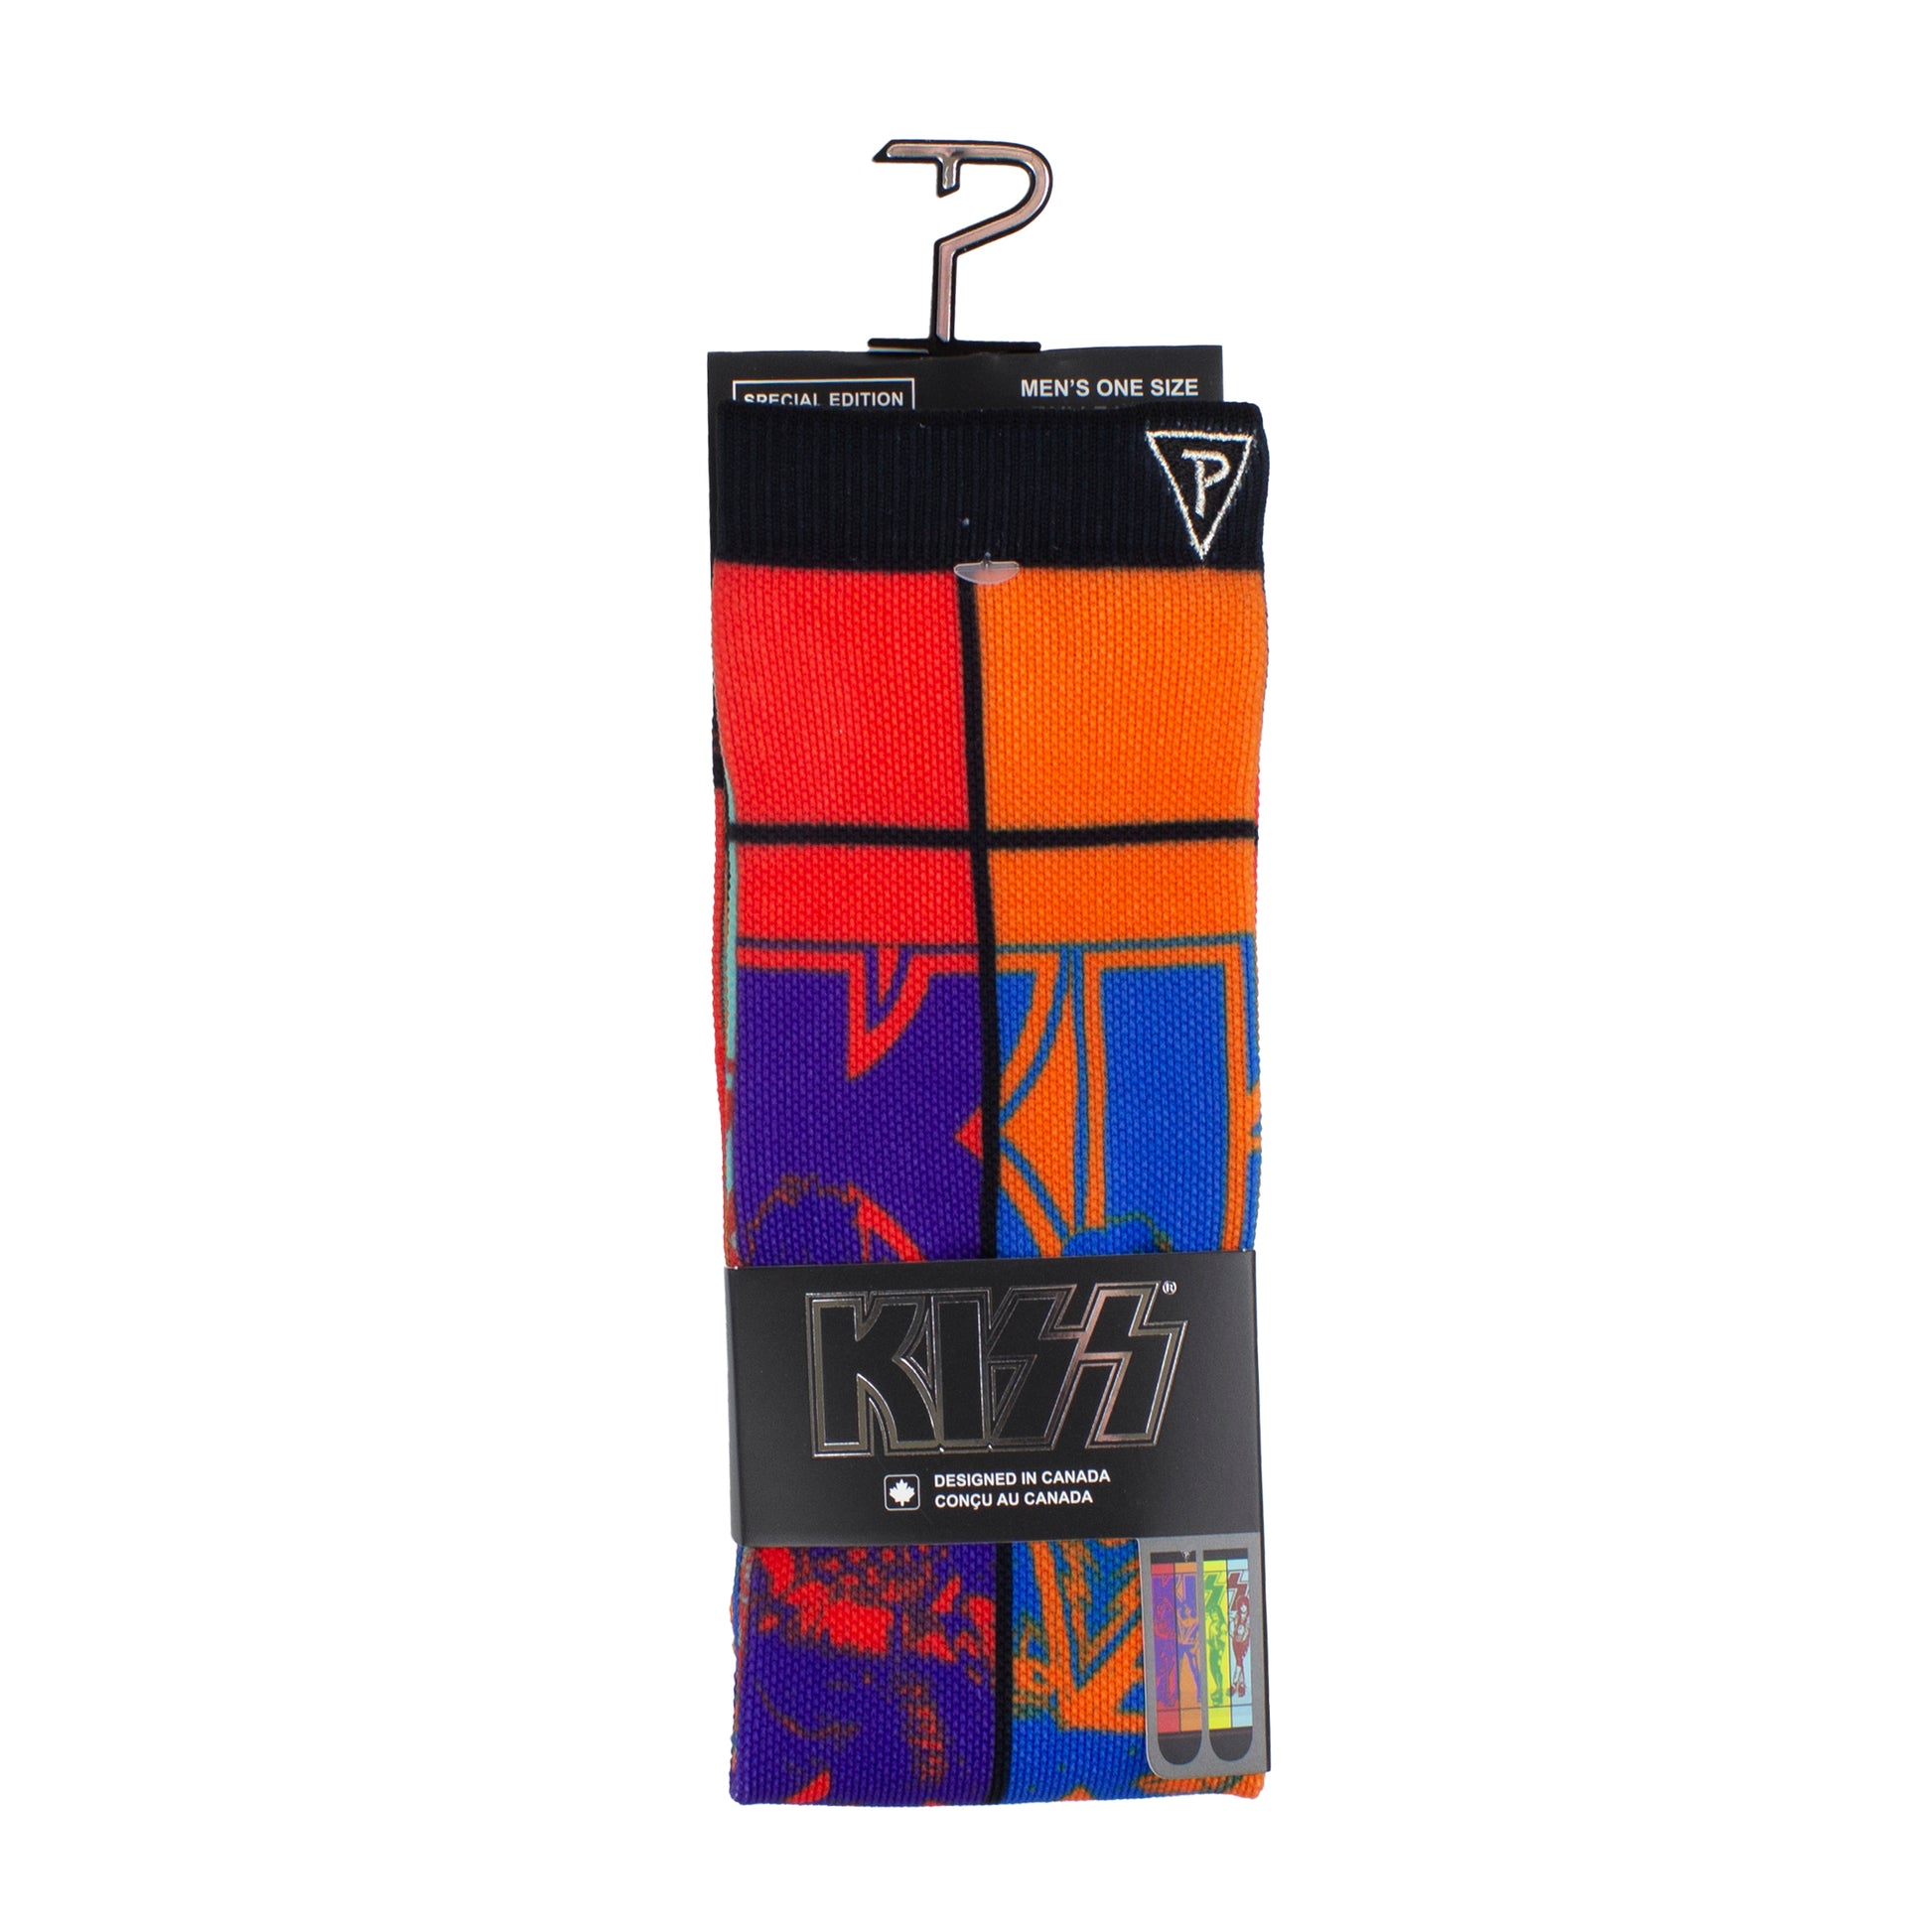 KISS® crew socks - Mixed Colors 1 pair  Wear the ultimate functional and fun footwear with these official KISS® socks.